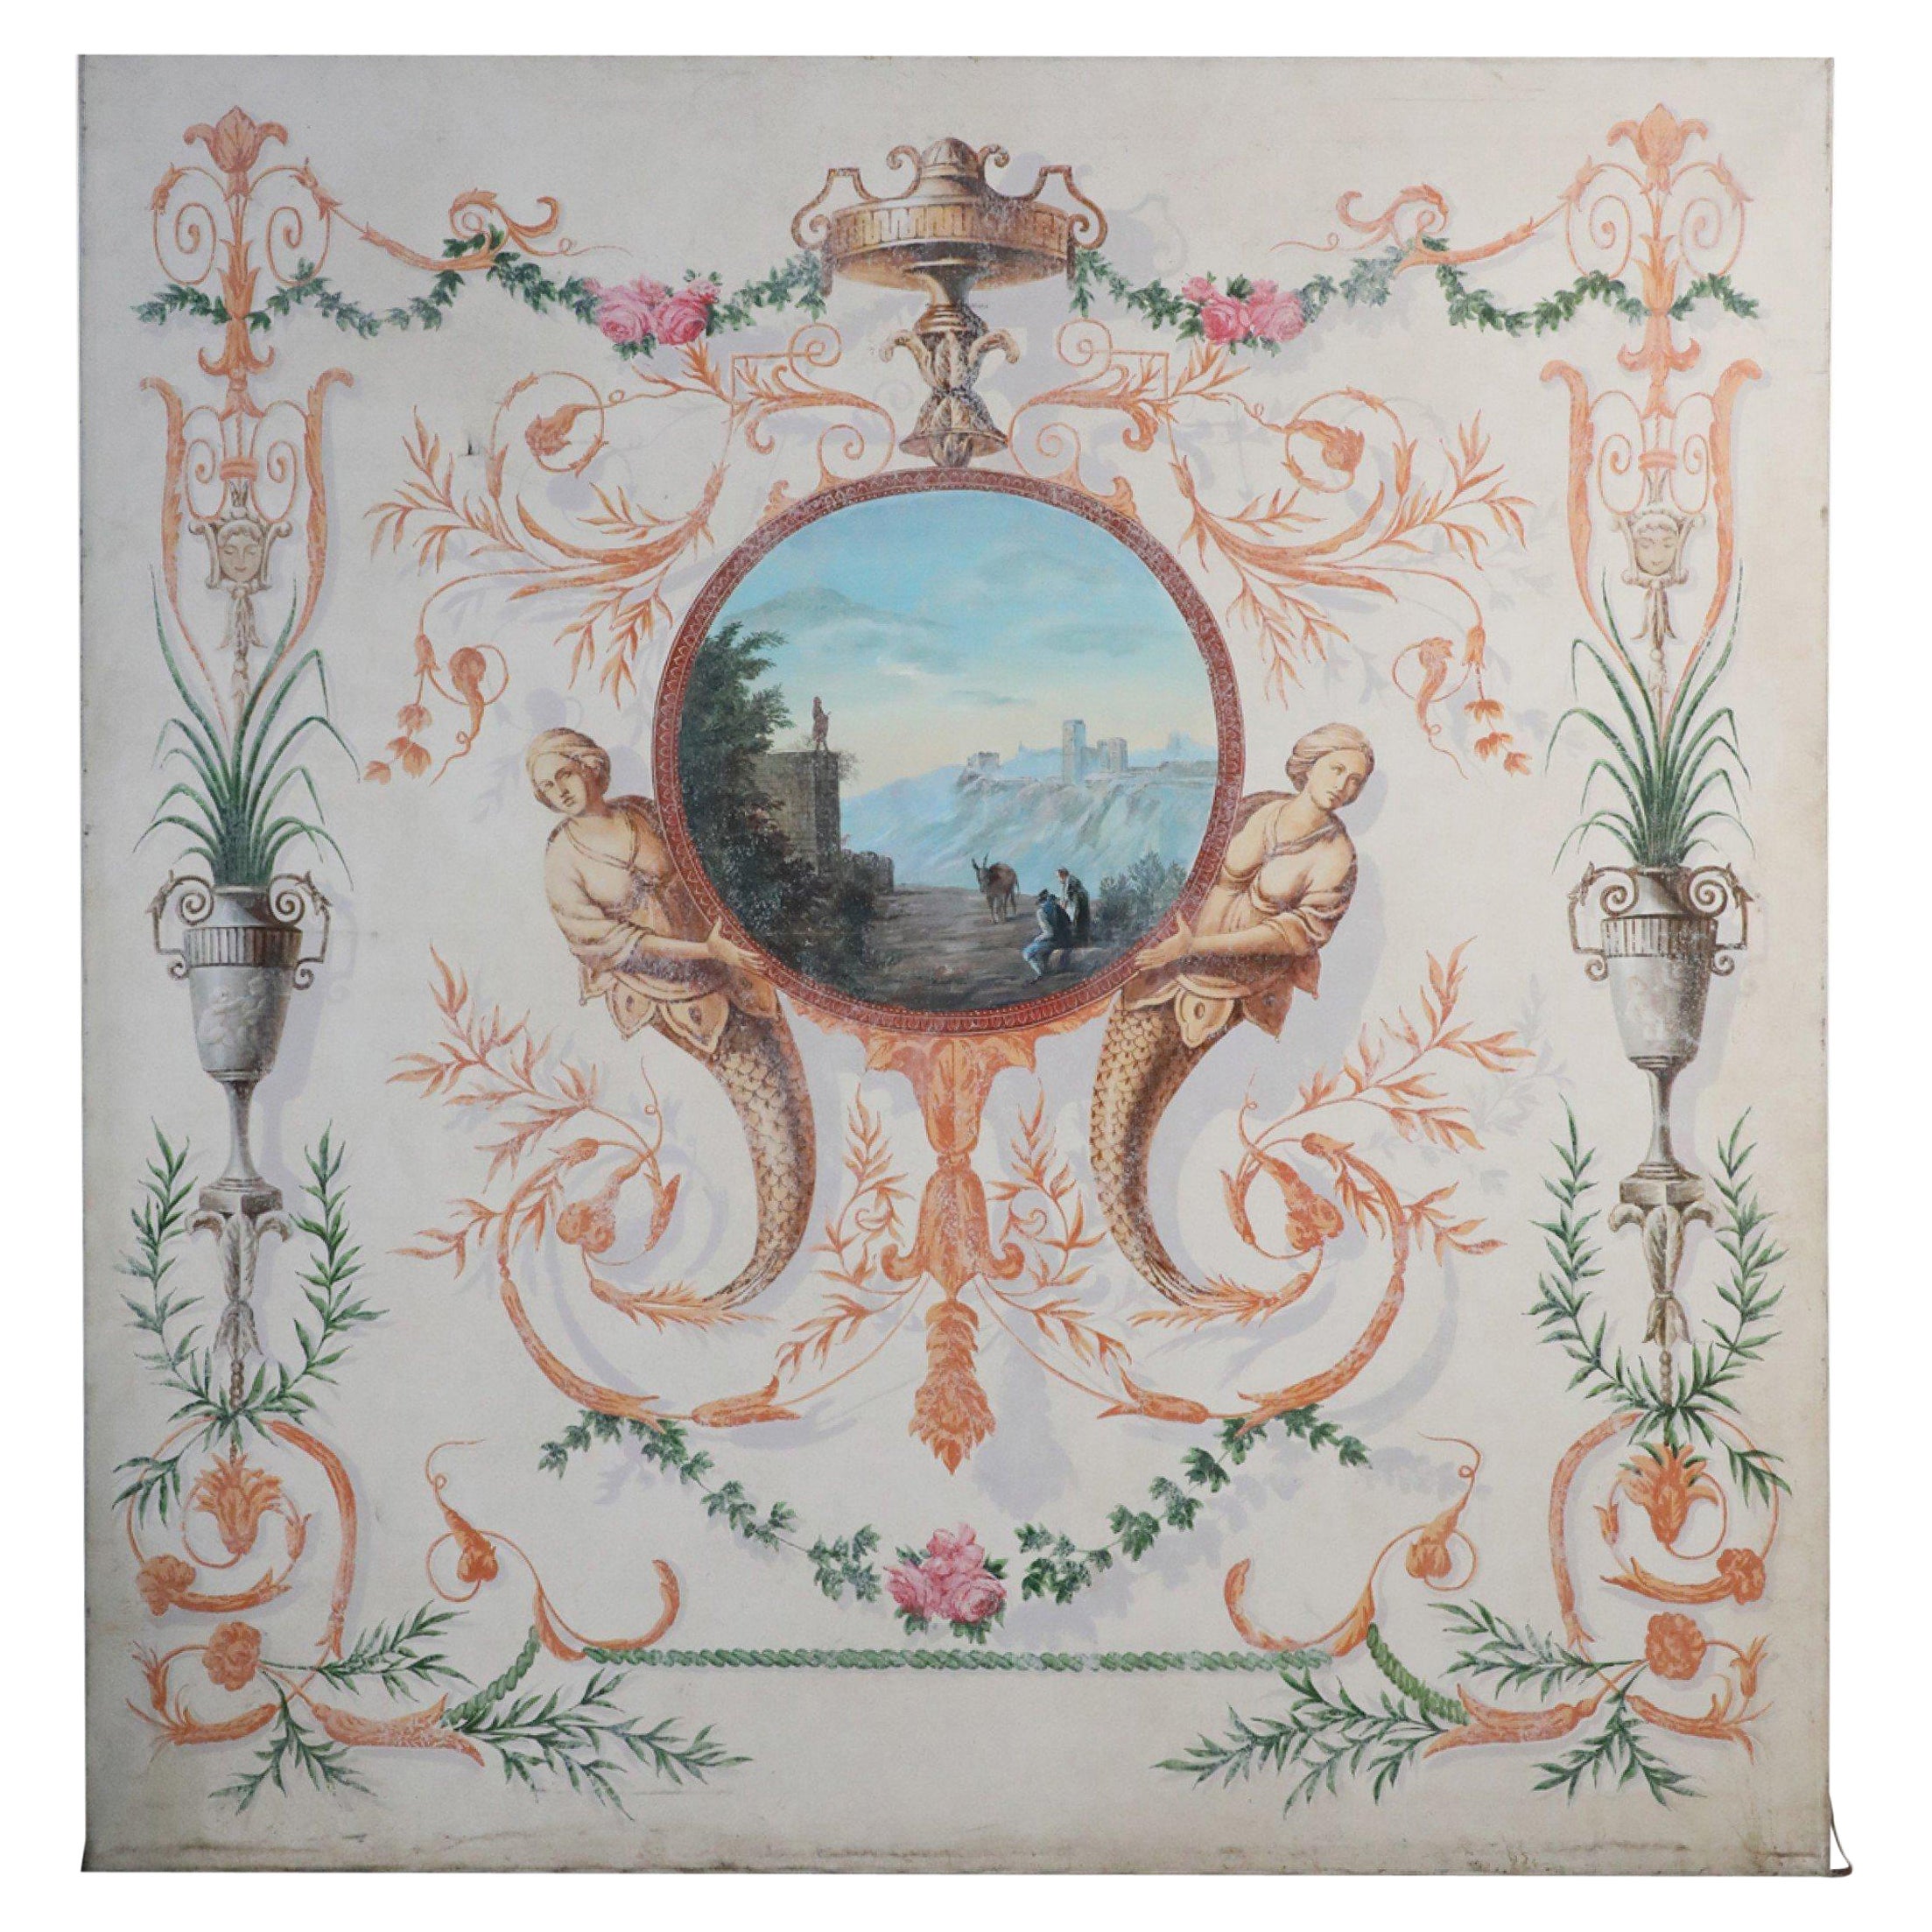 Neoclassical Landscape Painting with Mermaid and Floral Ornamentation